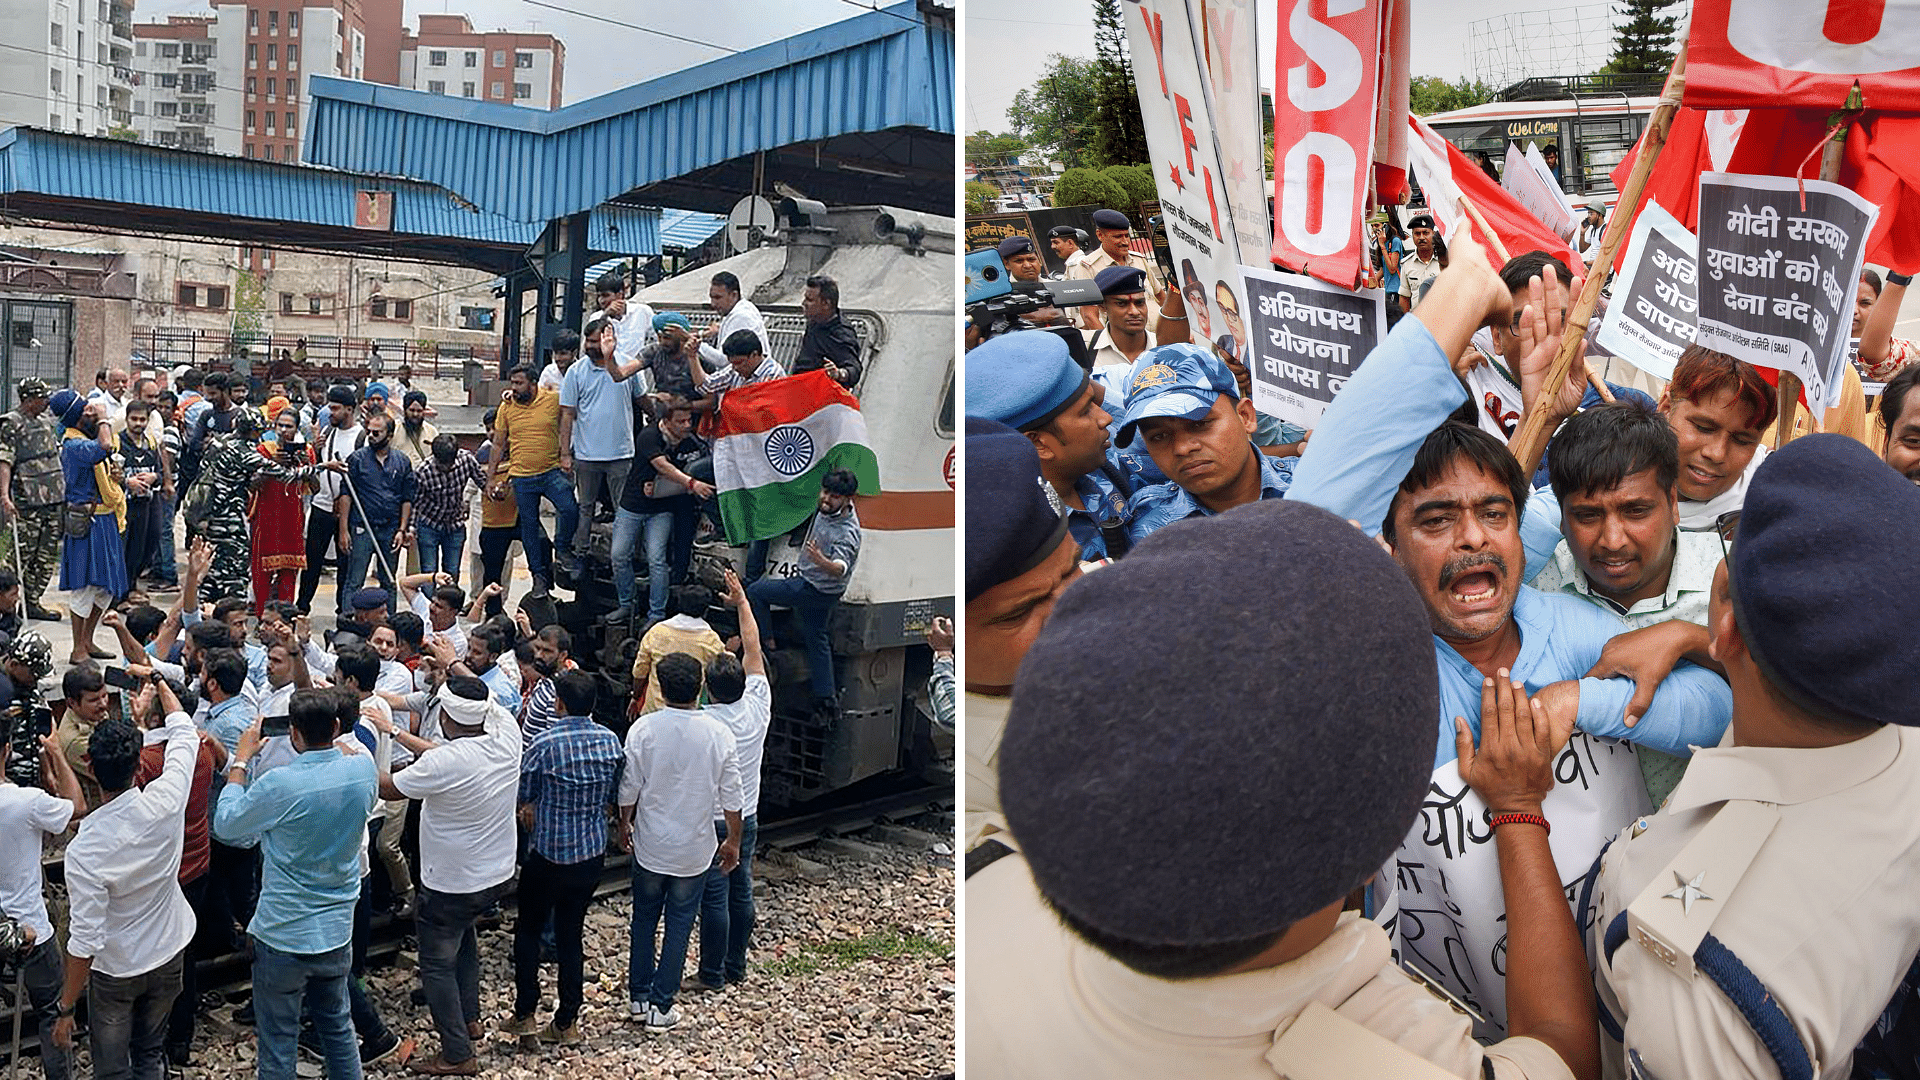 <div class="paragraphs"><p>Agnipath Scheme Protests Live: As protests against the Union government's new Agnipath scheme entered the sixth day, security has been ramped up across states in view of a Bharat Bandh called on Monday, 20 June.</p></div>